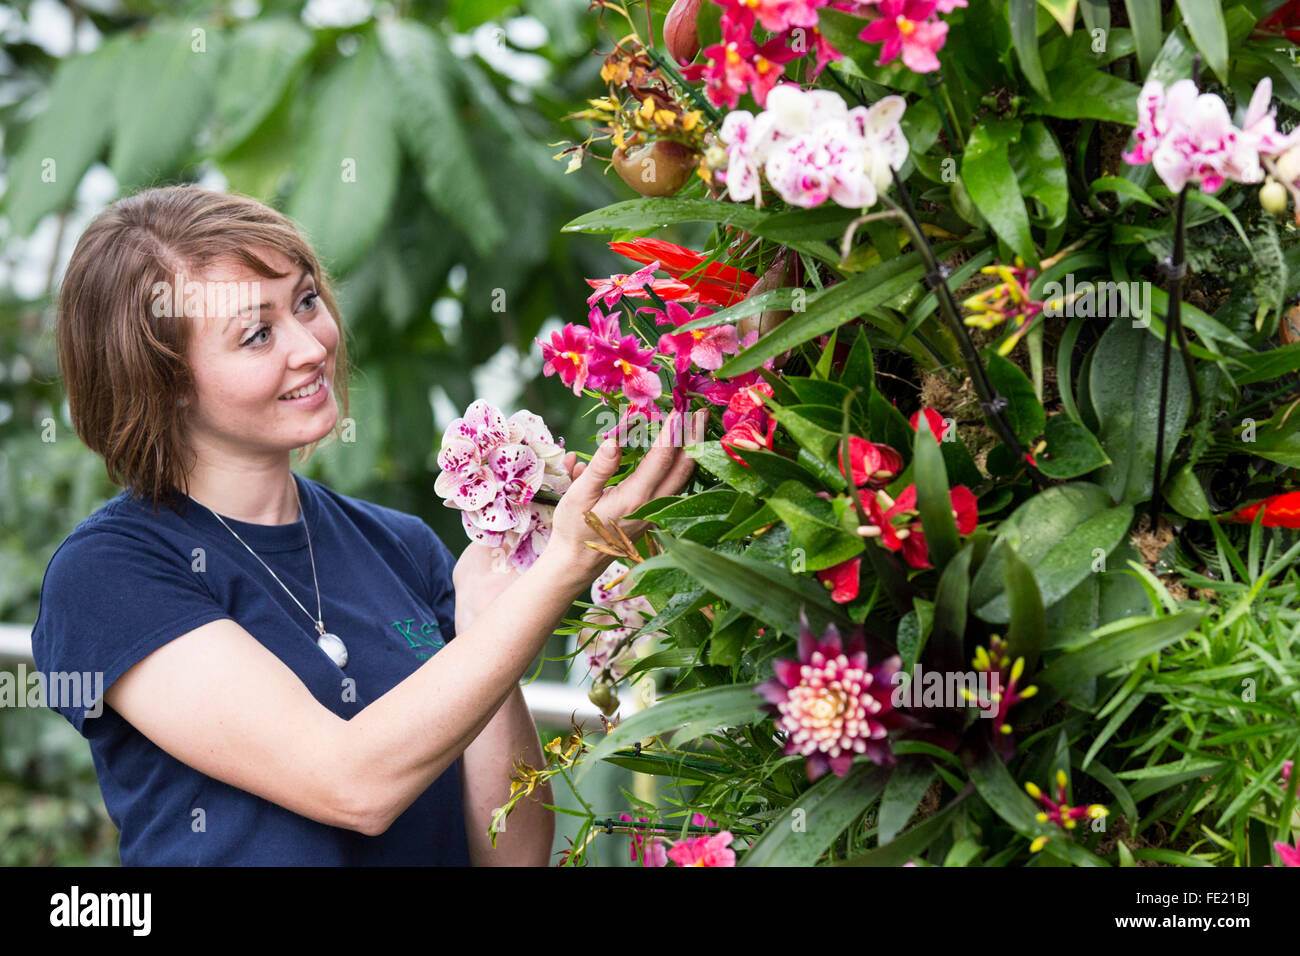 London, UK. 4 February 2016. Horticulturist Hannah Button poses with plants at the annual Orchid Festival in the Princess of Wales Conservatory at Kew Gardens. In 2016 Kew celebrates with a spectacular carnival of dazzling Brazilian colours and showcases thousands of Orchids, Bromeliads and other tropical plants. Open from 6 February to 6 March 2016. Credit:  Vibrant Pictures/Alamy Live News Stock Photo